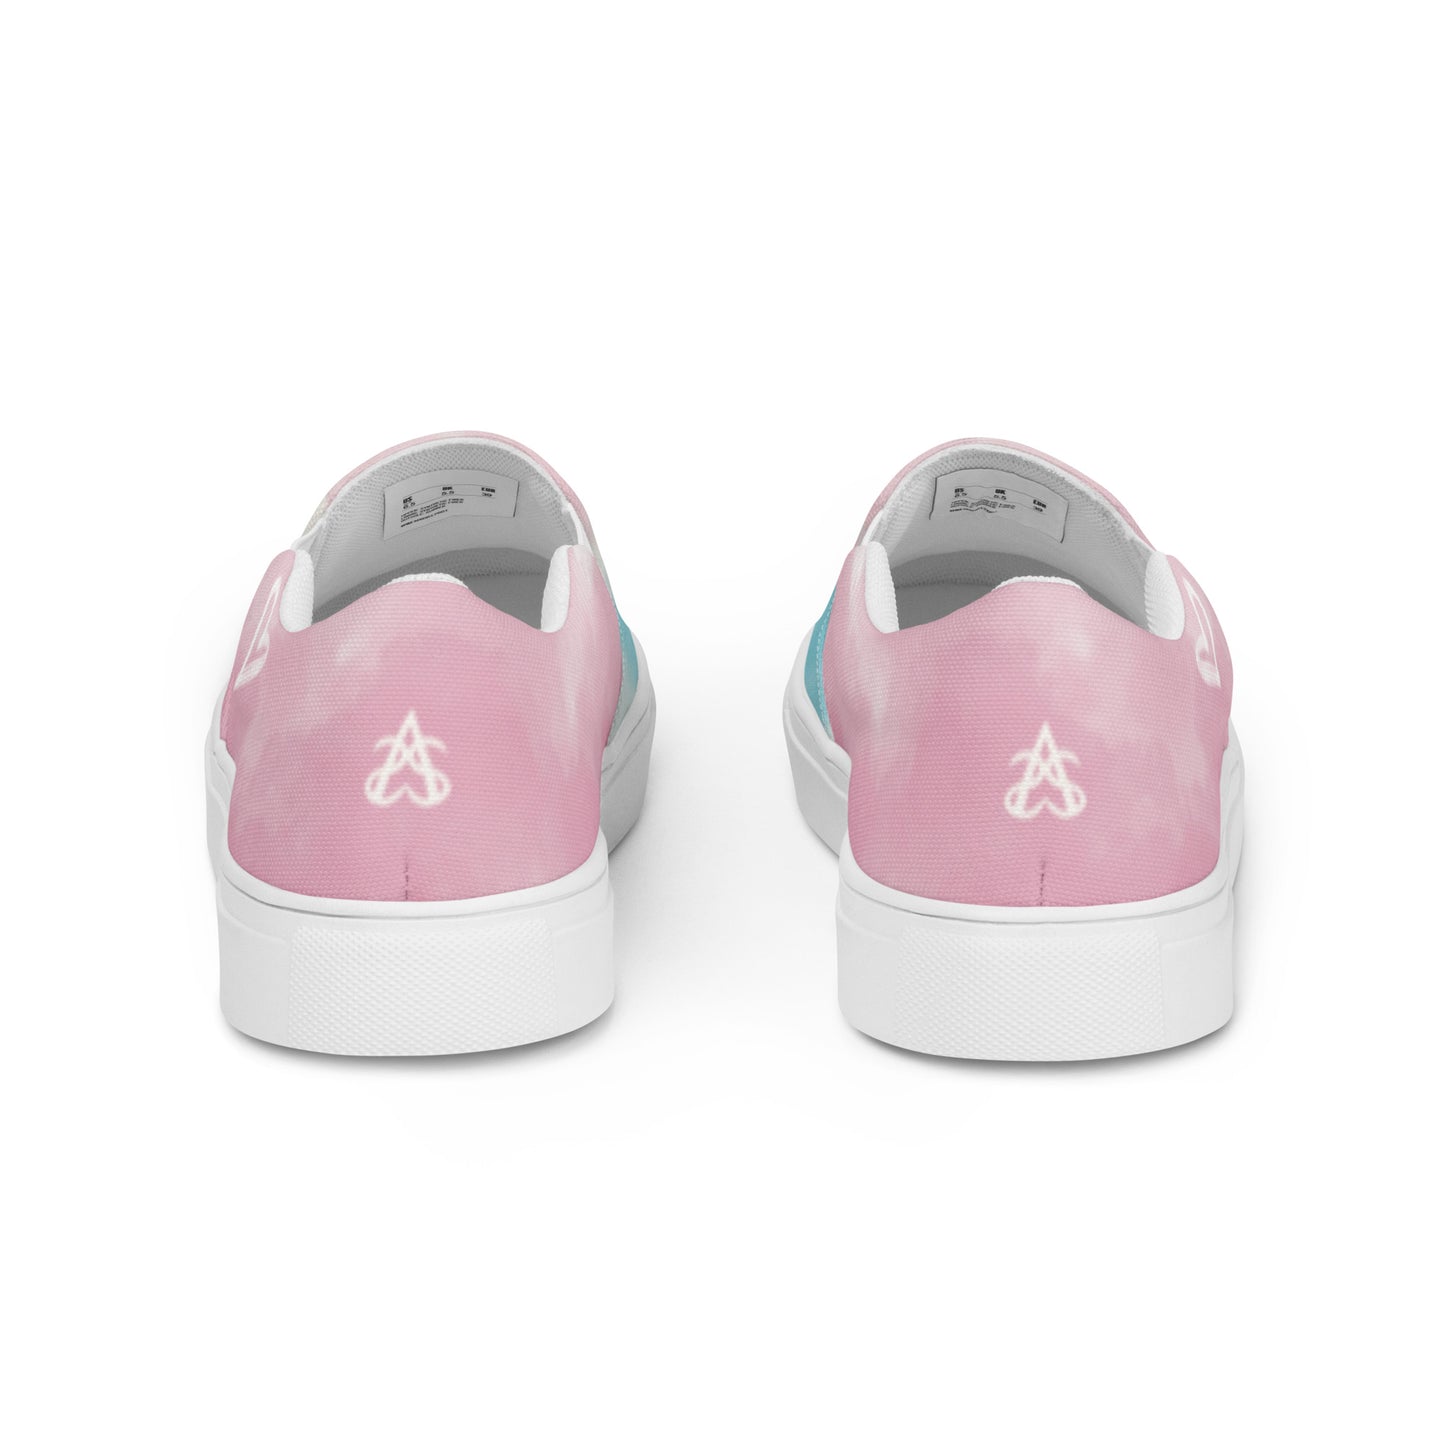 Back view: A pair of slip on shoes has a cloud pattern with color blocked areas of blue, white, and pink, a white doodled heart on the outside, and the Aras Sivad Studio logo on the heel.